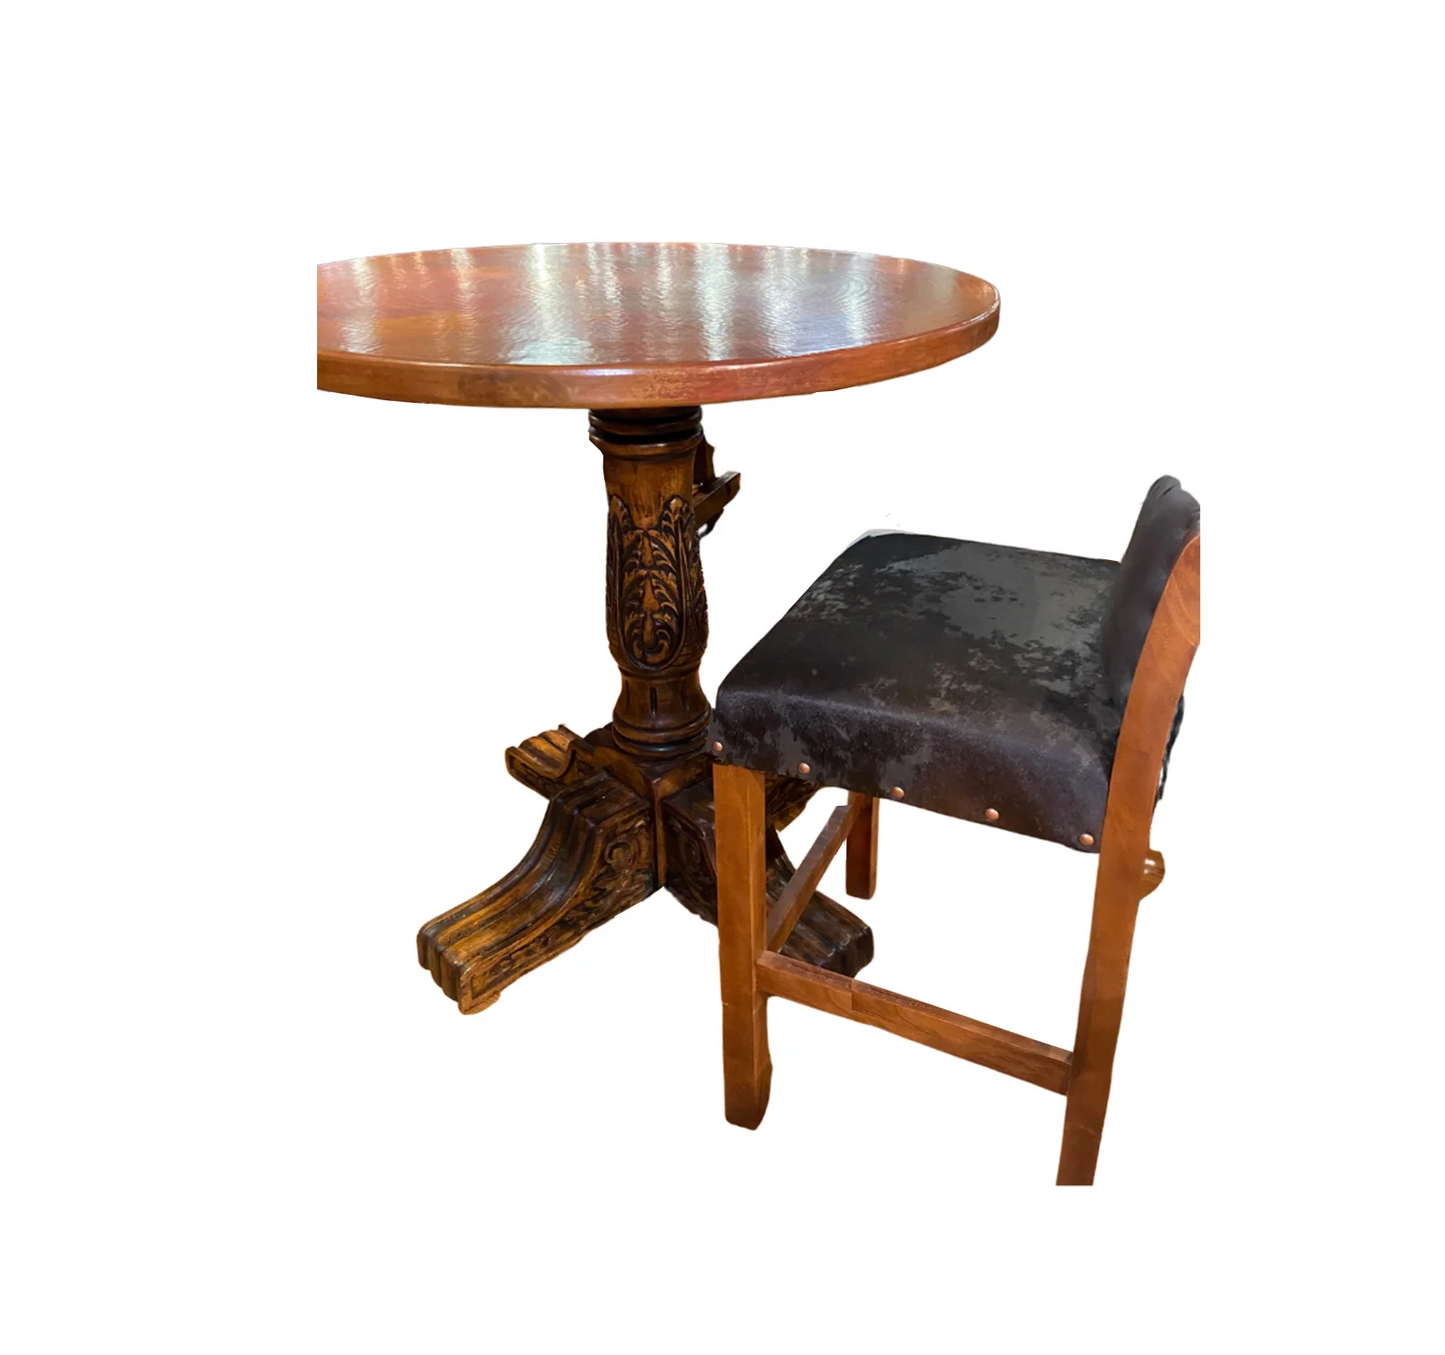 Barstools also available